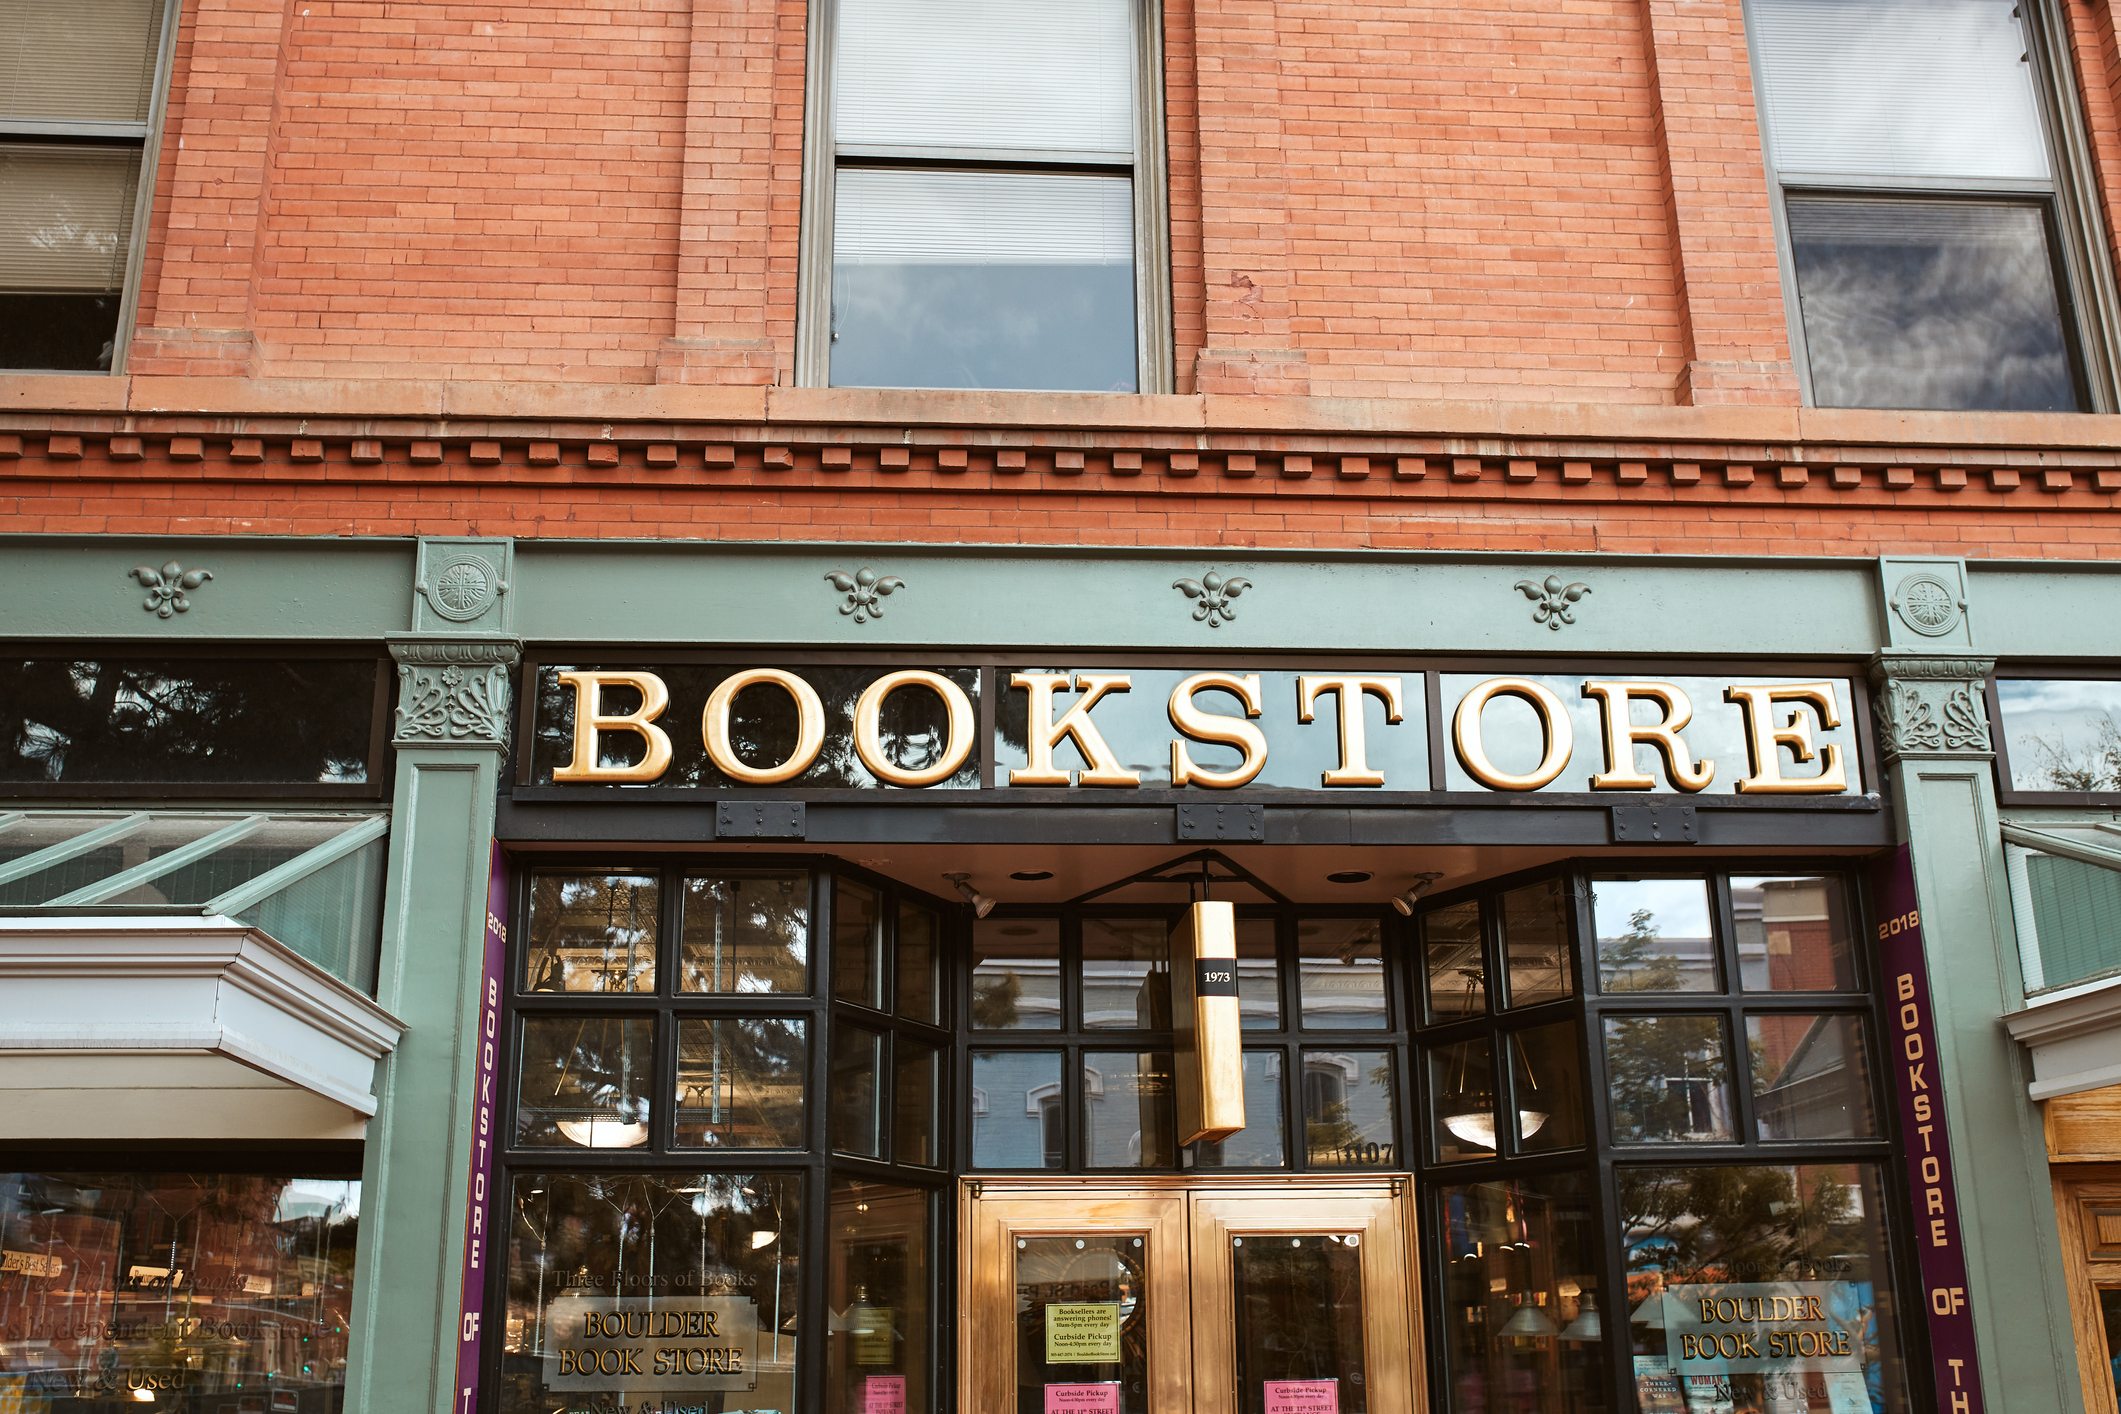 Book Store Storefront with sign